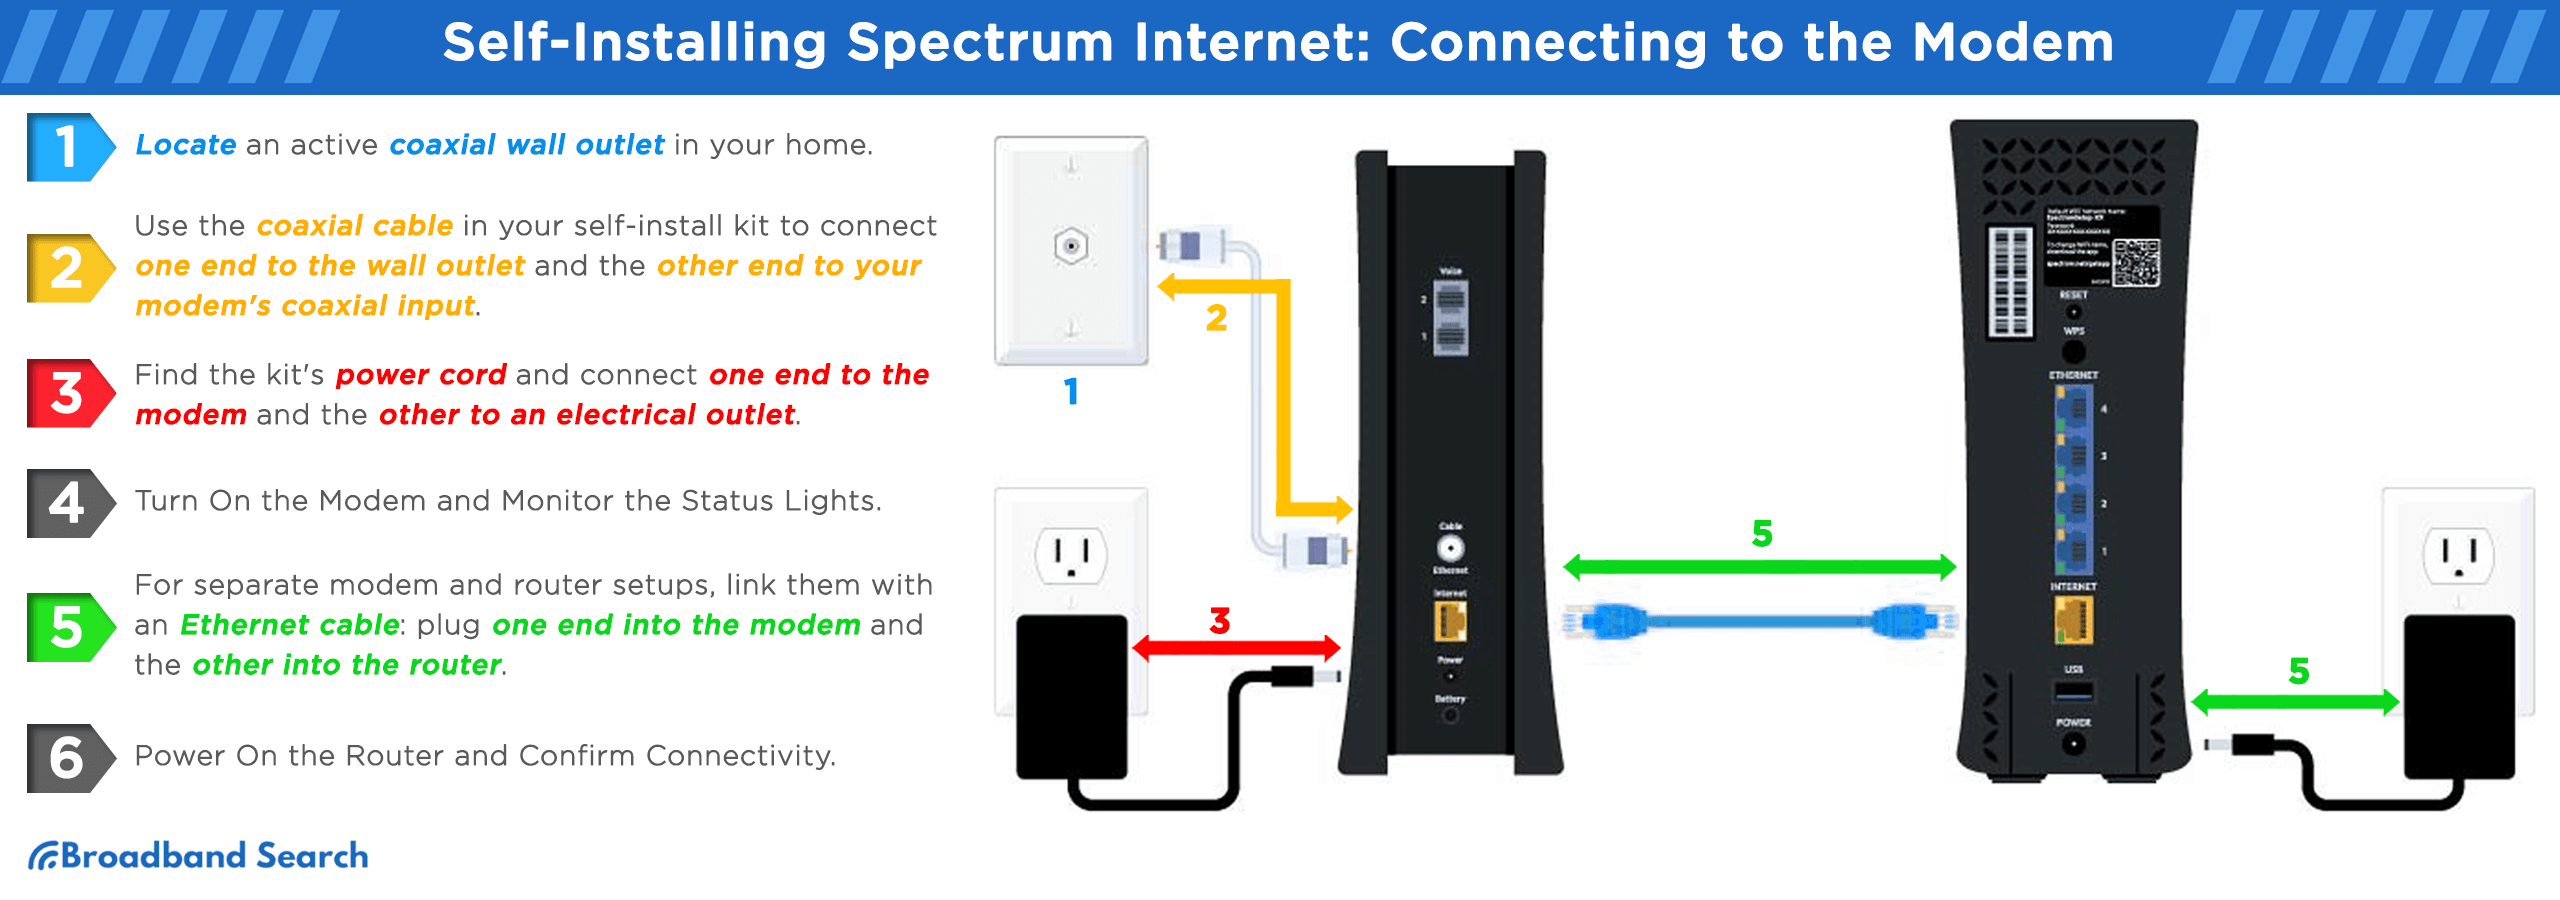 self-installing spectrum internet: Connecting to the modem